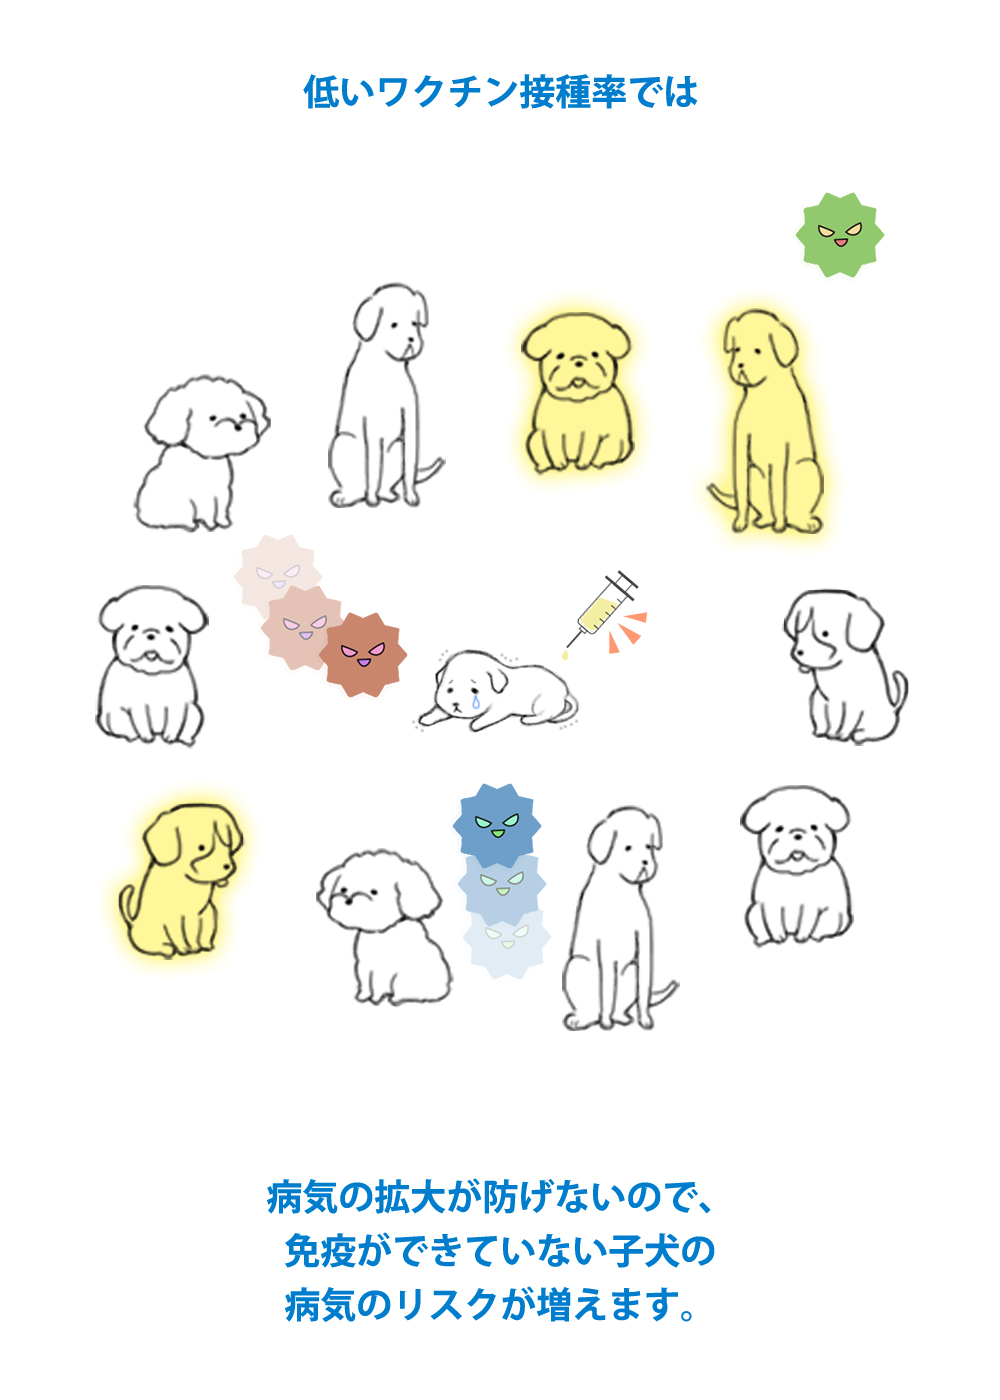 HD限定 犬 ワクチン 回数 - 画像動物フリー